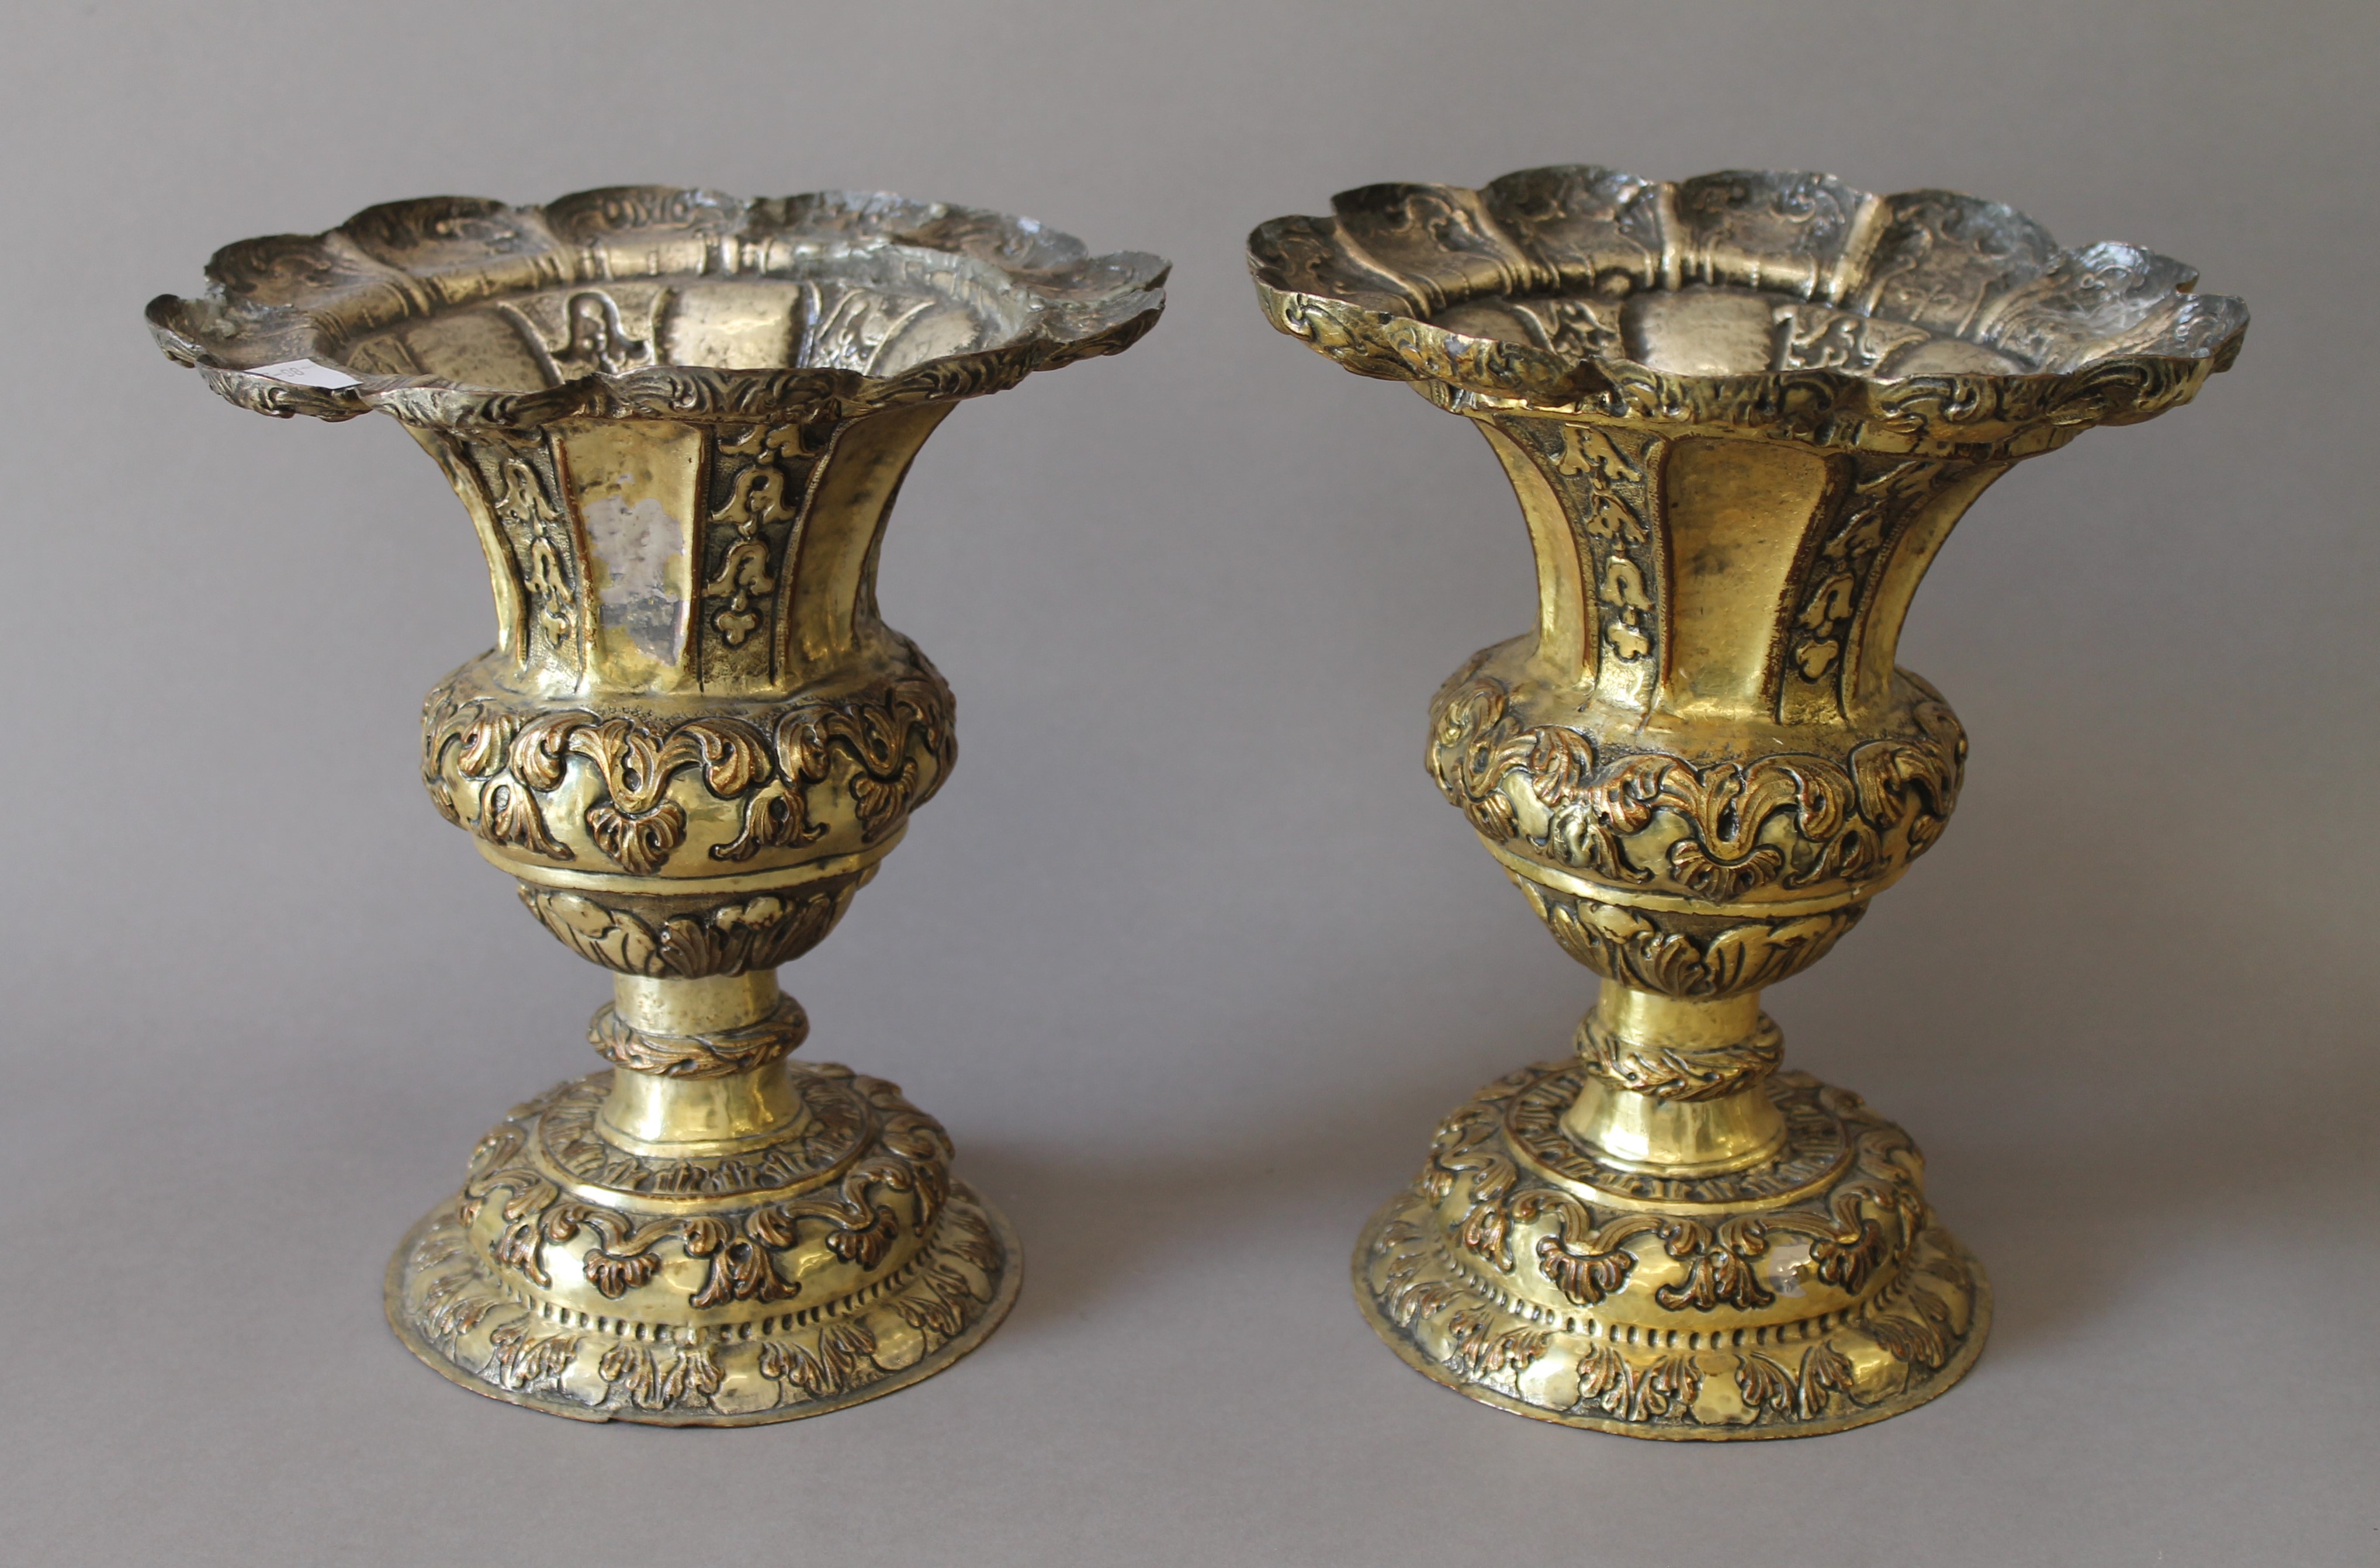 A pair of 19th century gilt copper chalices. 21 cm high.